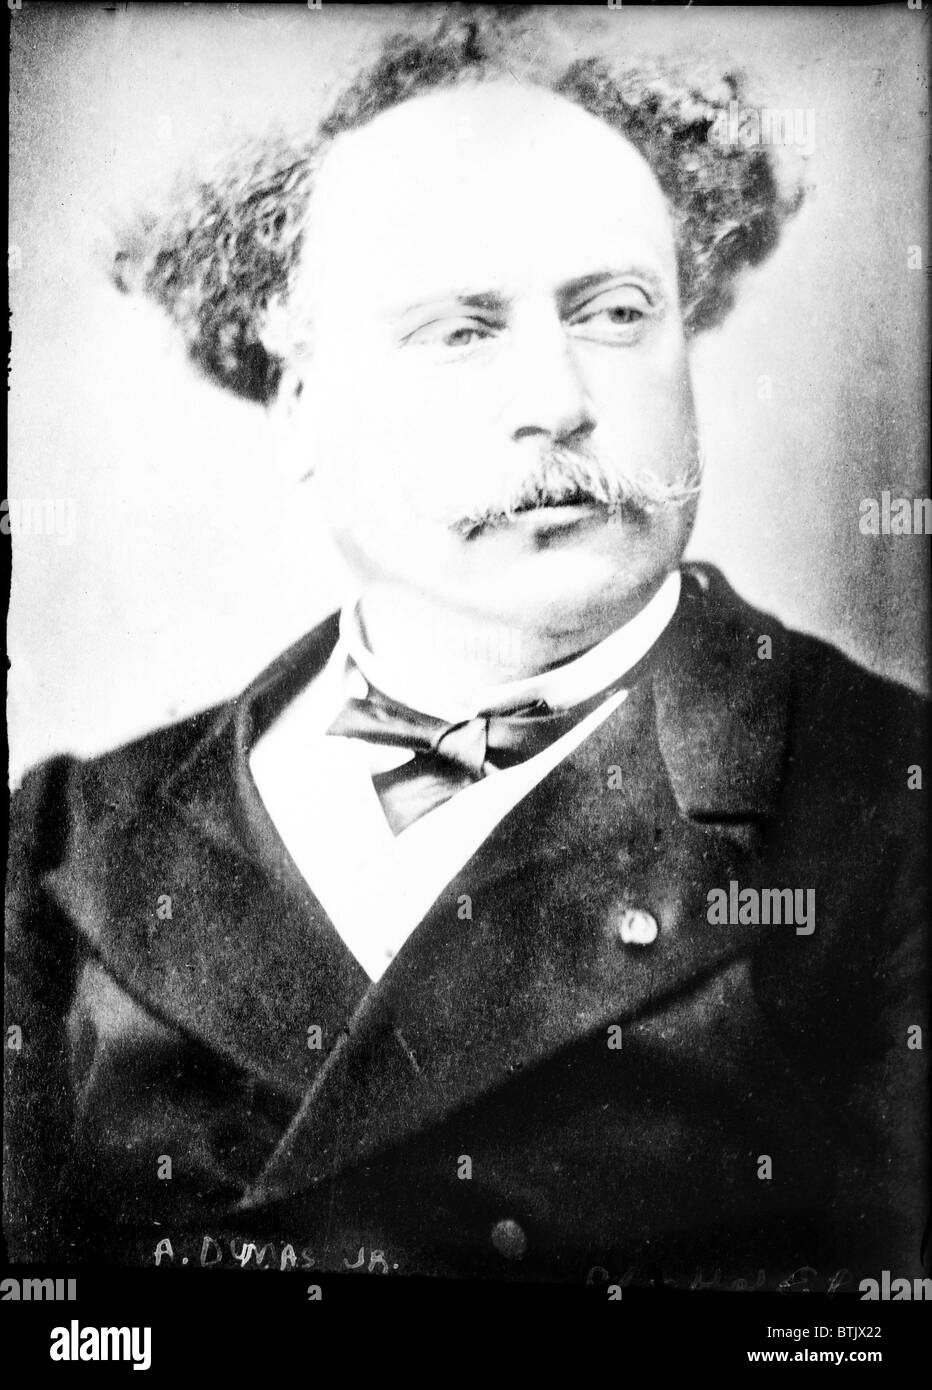 Alexandre Dumas, fils (1824-1895), popular French dramatist and historical novelist, best known as the author of the novel and play 'Camille' which became the basis for Verdi's 1853 opera, 'La Traviata'. Stock Photo